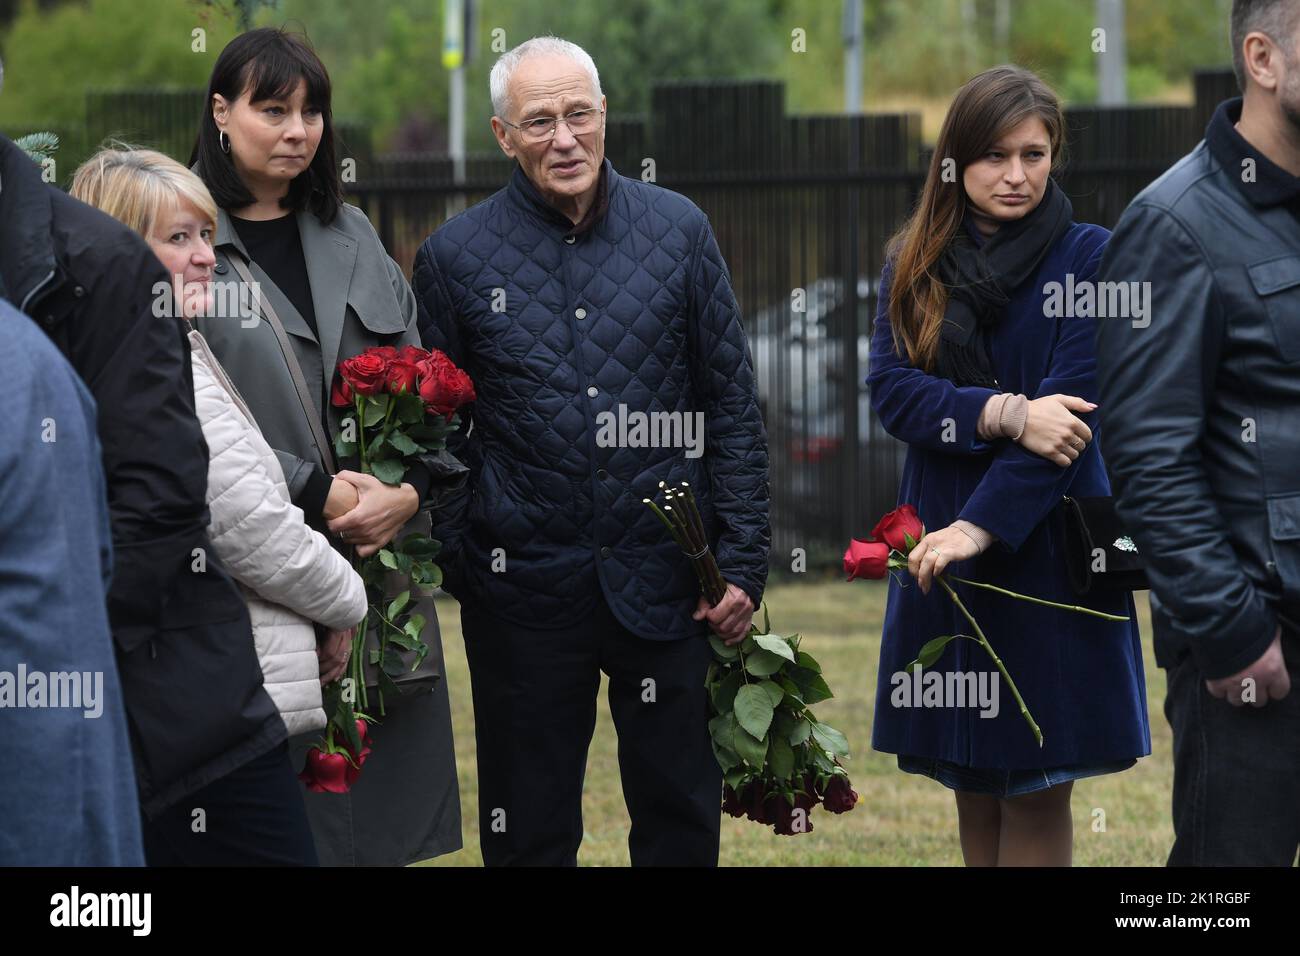 Moscow. The member of the committee on the international affairs of the Federation Council Grigory Rapota (in the center) at a ceremony of farewell to the CEO of media group of Komsomolskaya Pravda Vladimir Sungorkin on the Troyekurovskoye Cemetery. Stock Photo